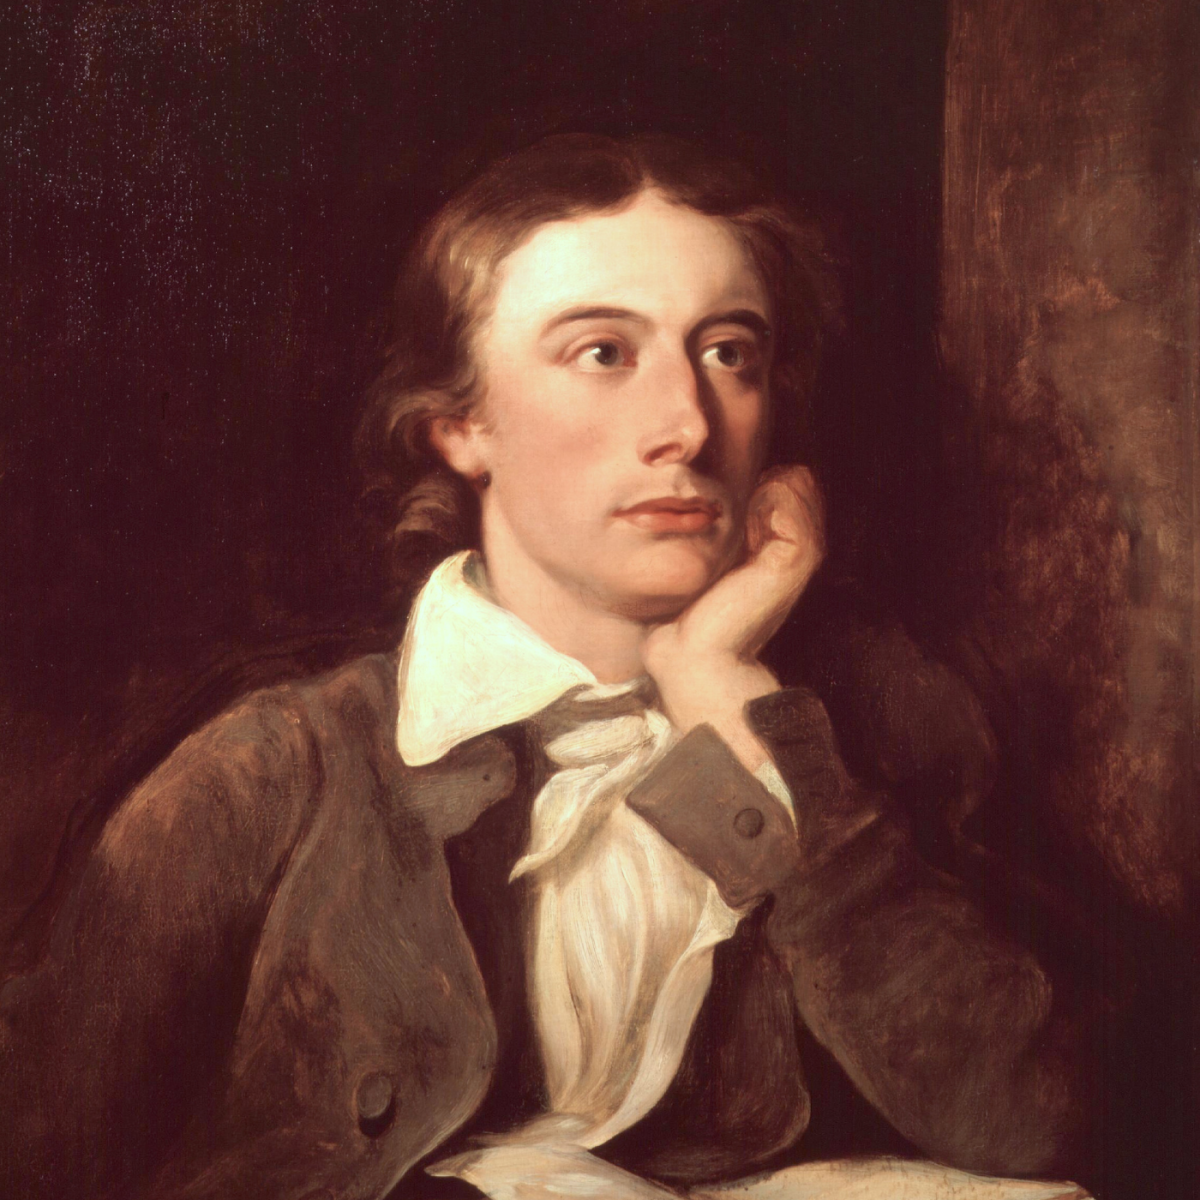 John Keats is perhaps one of the best-known and quintessential poets of Romanticism. 